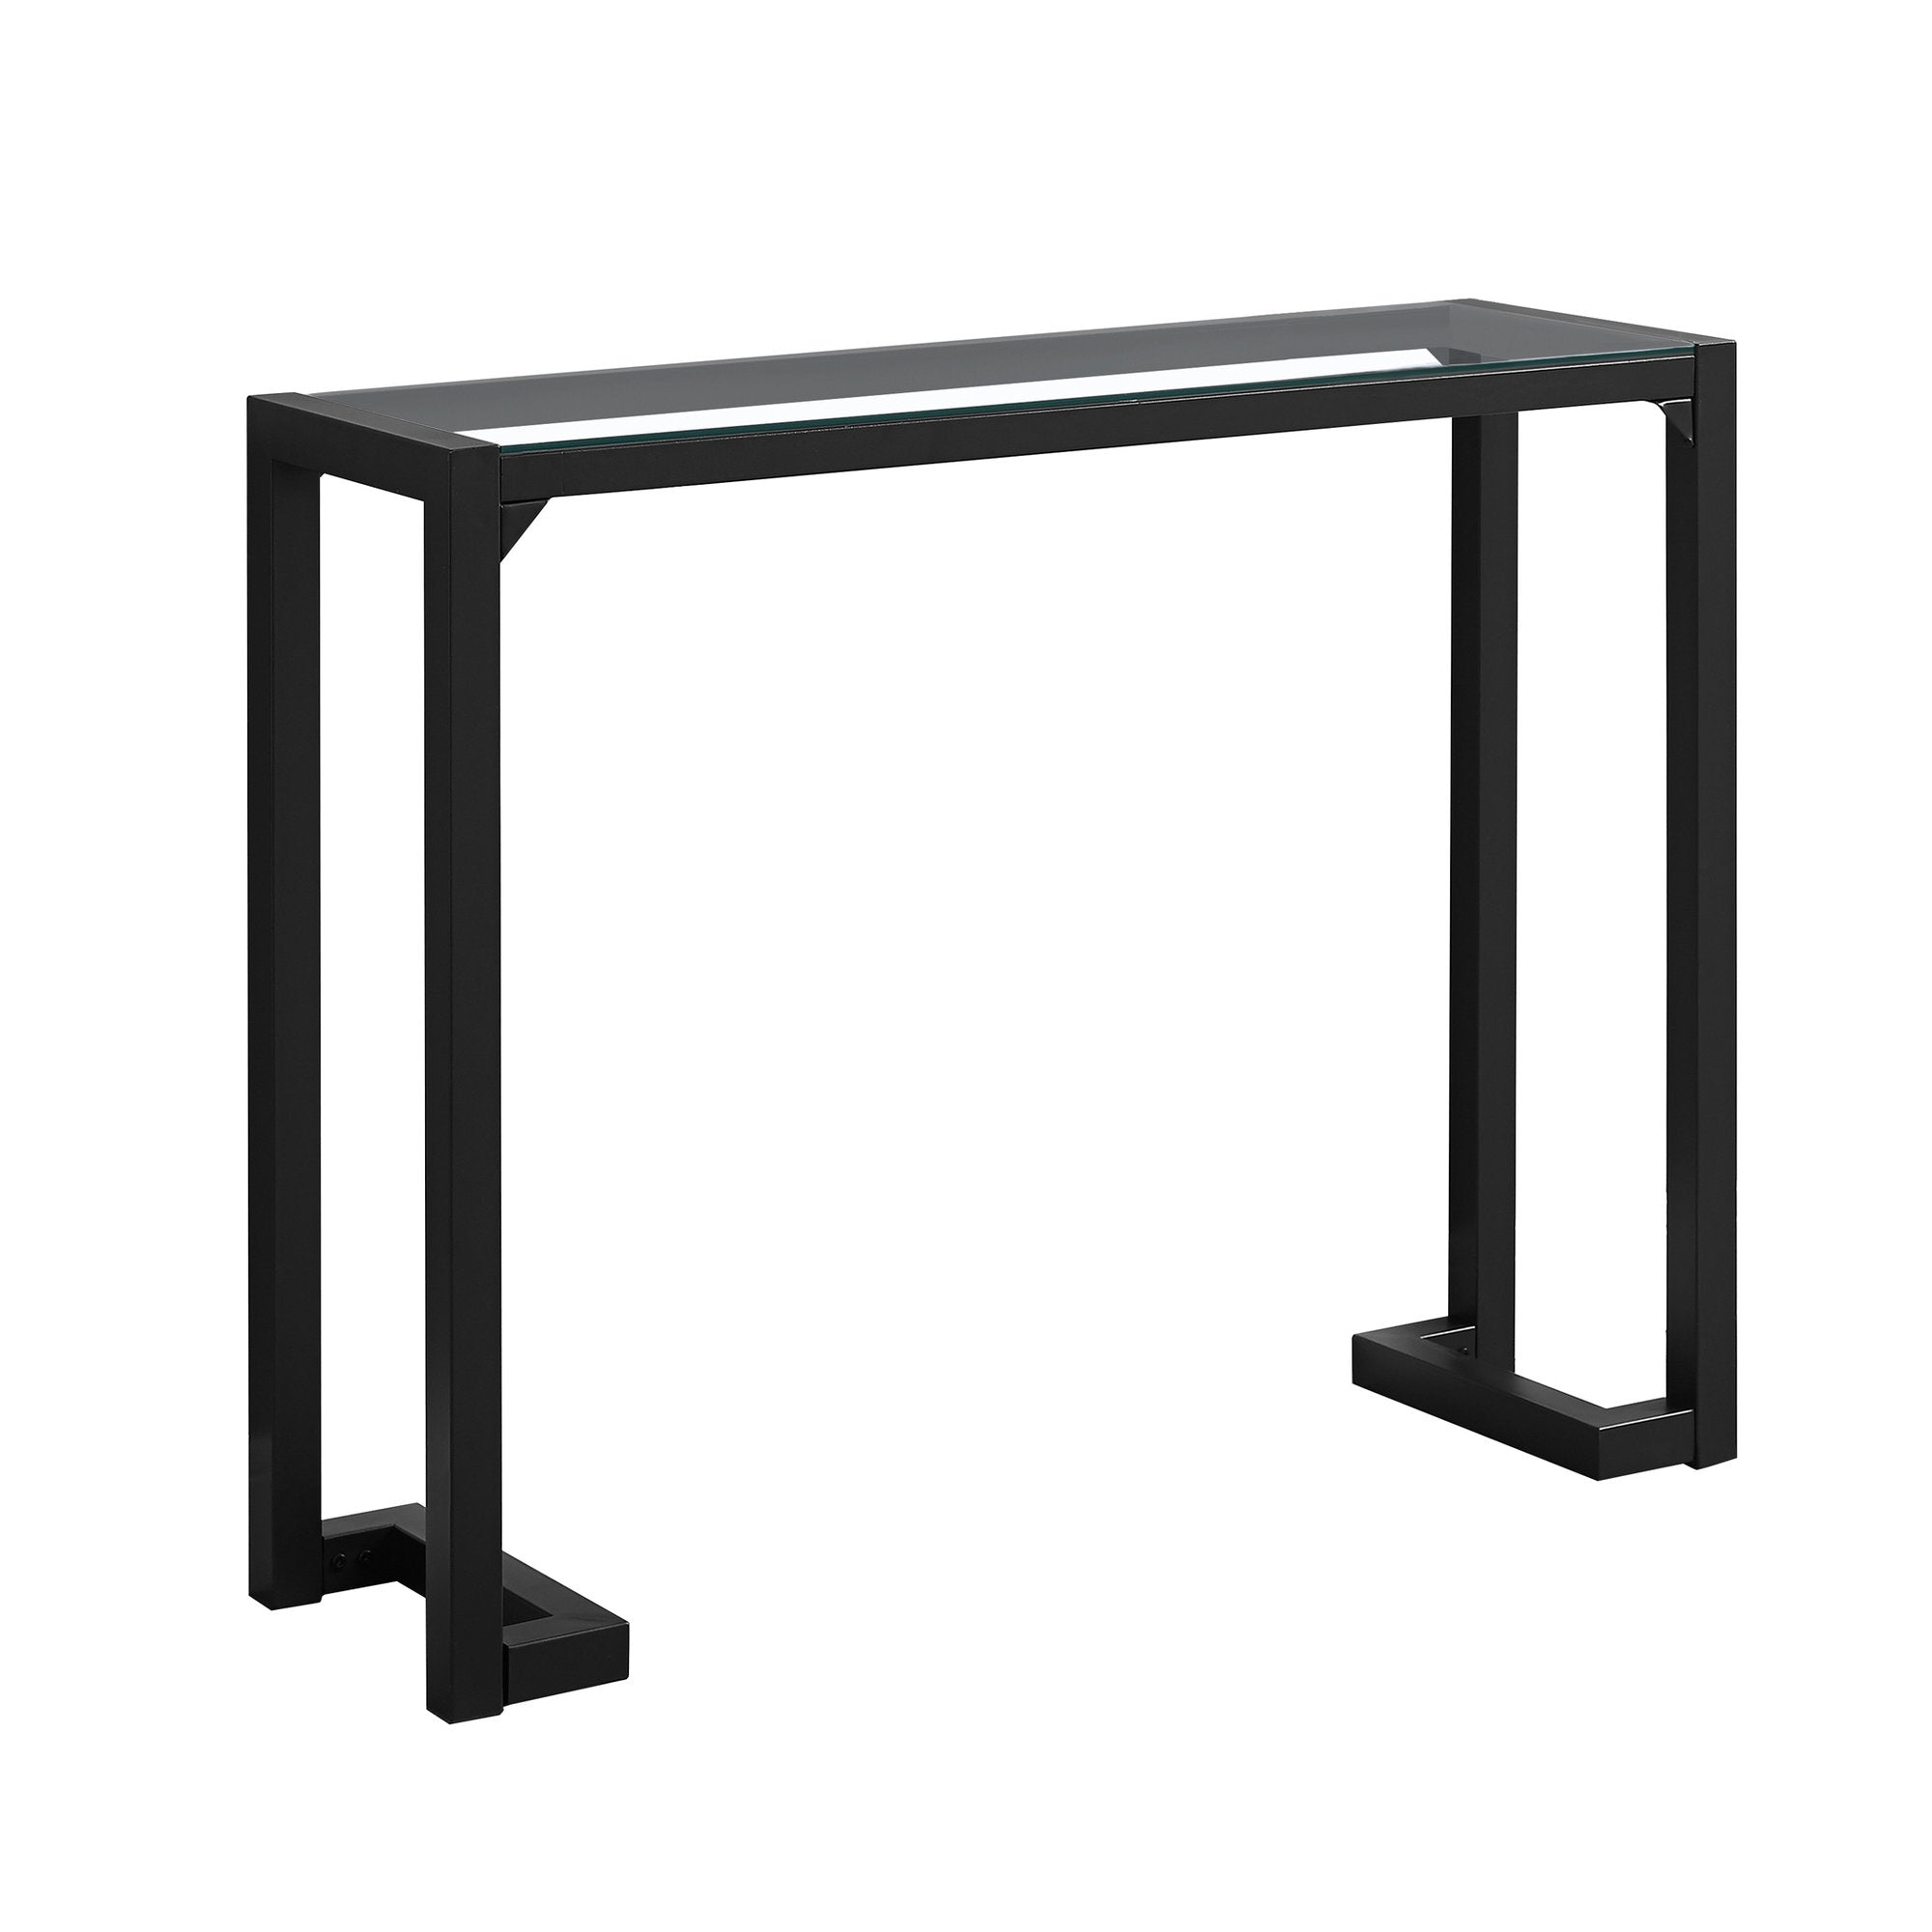 ACCENT TABLE - 42"L / BLACK / TEMPERED GLASS HALL CONSOLE